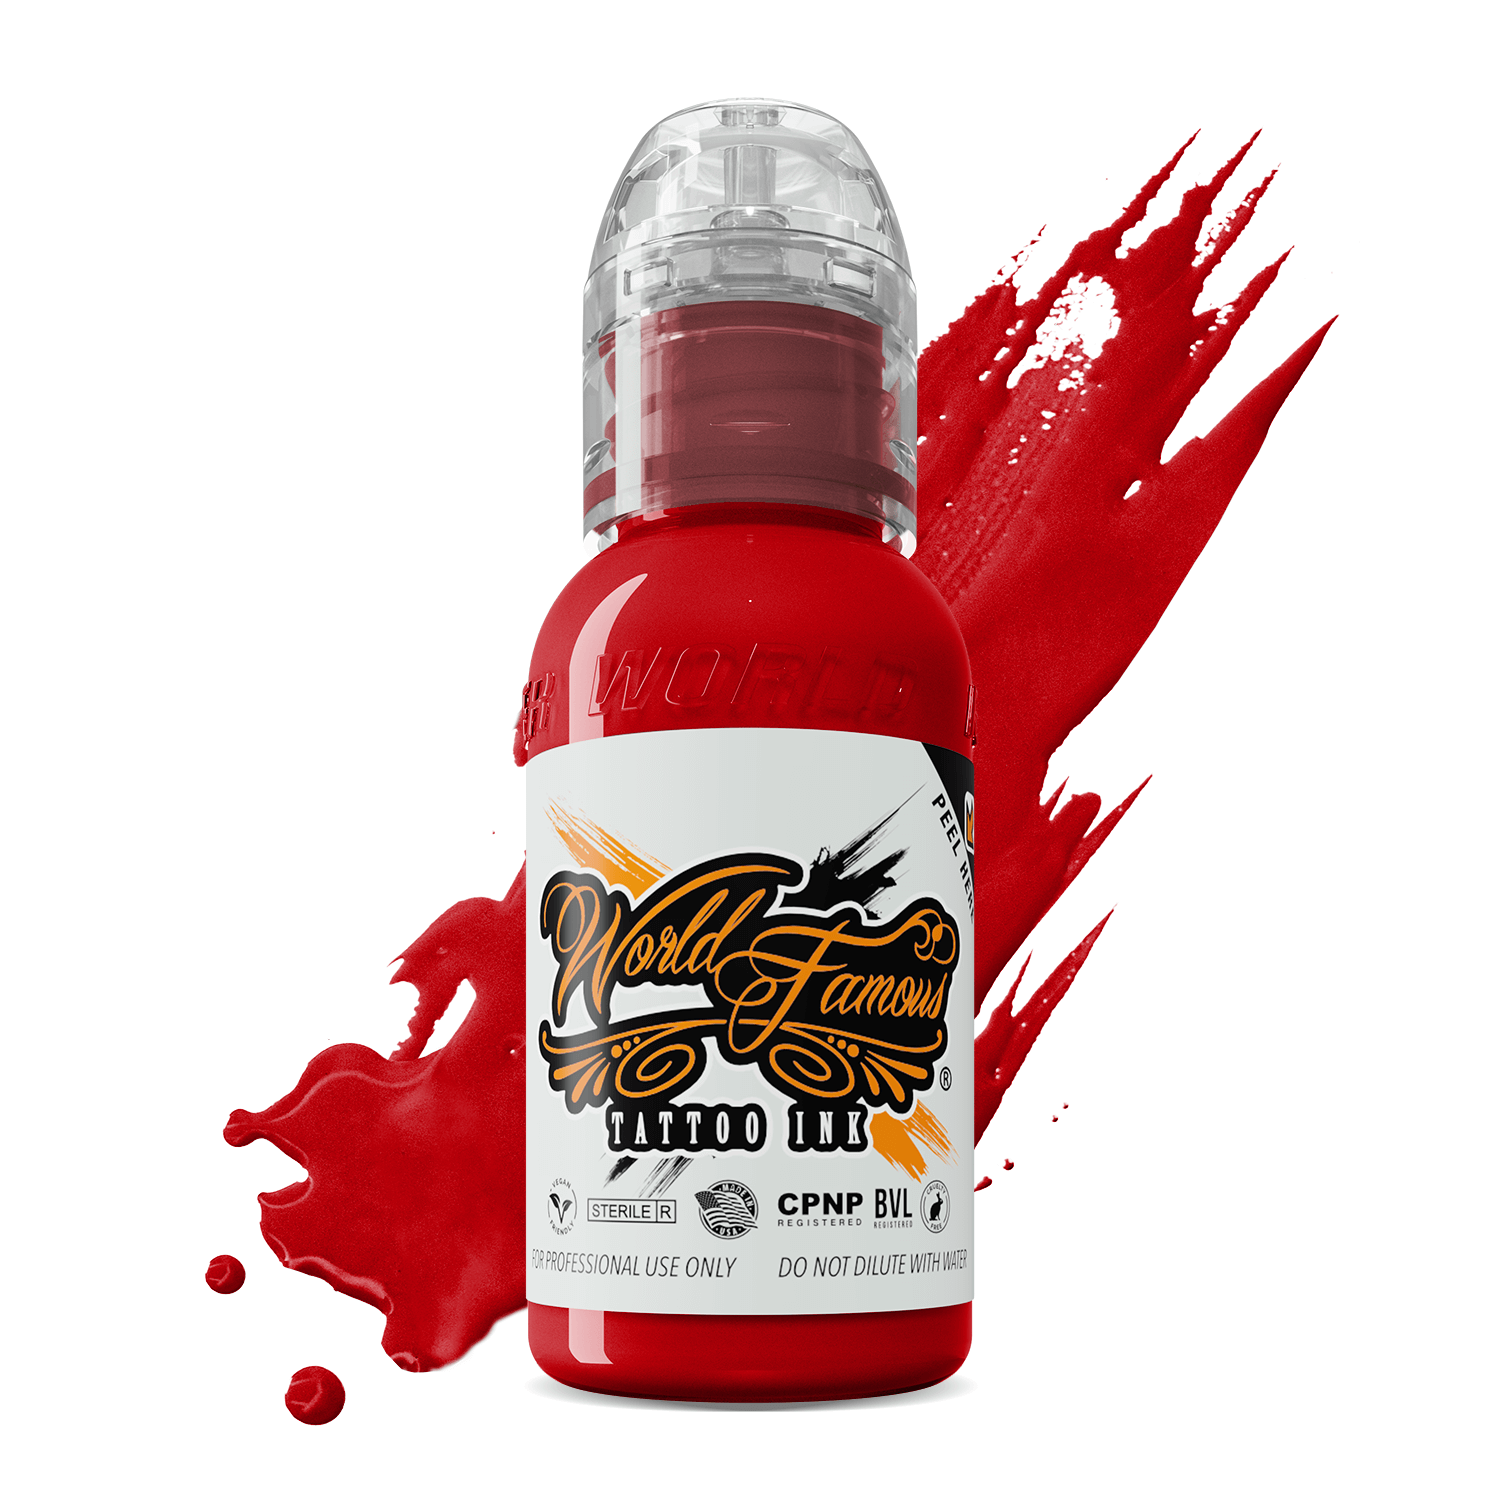 World Famous Tattoo Ink - Sailor Jerry Red Tattoo Ink - Professional Tattoo  Ink & Tattoo Supplies - Skin-Safe Permanent Tattooing in Bold Shades -  Vegan & Non-Toxic (1 oz) 1 Ounce (